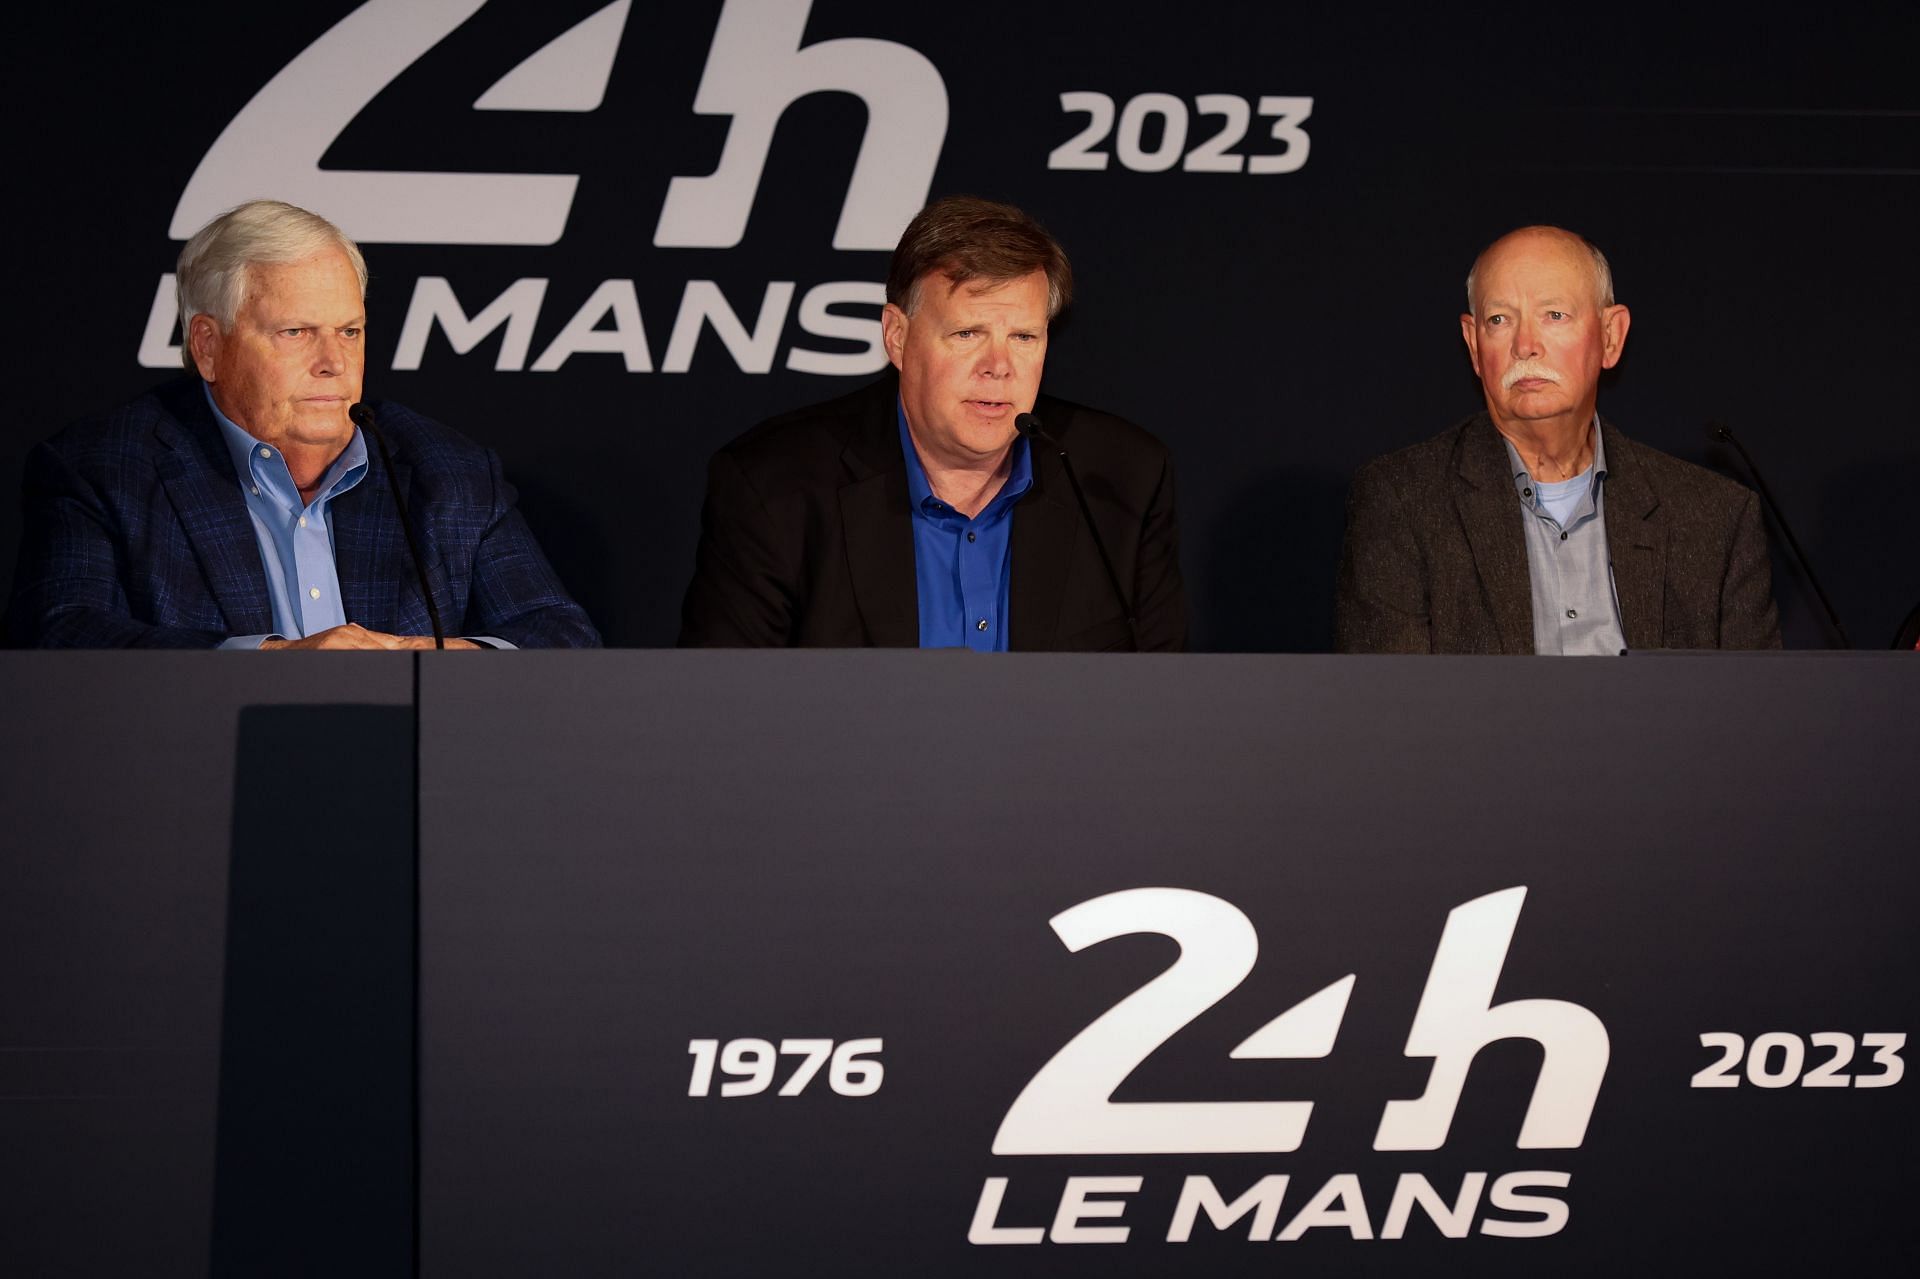 (L-R) Rick Hendrick, Jim Campbell and Stu Grant speak to the media during the NASCAR, IMSA, and Hendrick Motorsports press conference for the Garage 56 entry at the 2023 24 Hours of Le Mans at Sebring International Raceway in Florida. (Photo by Sam Greenwood/Getty Images)